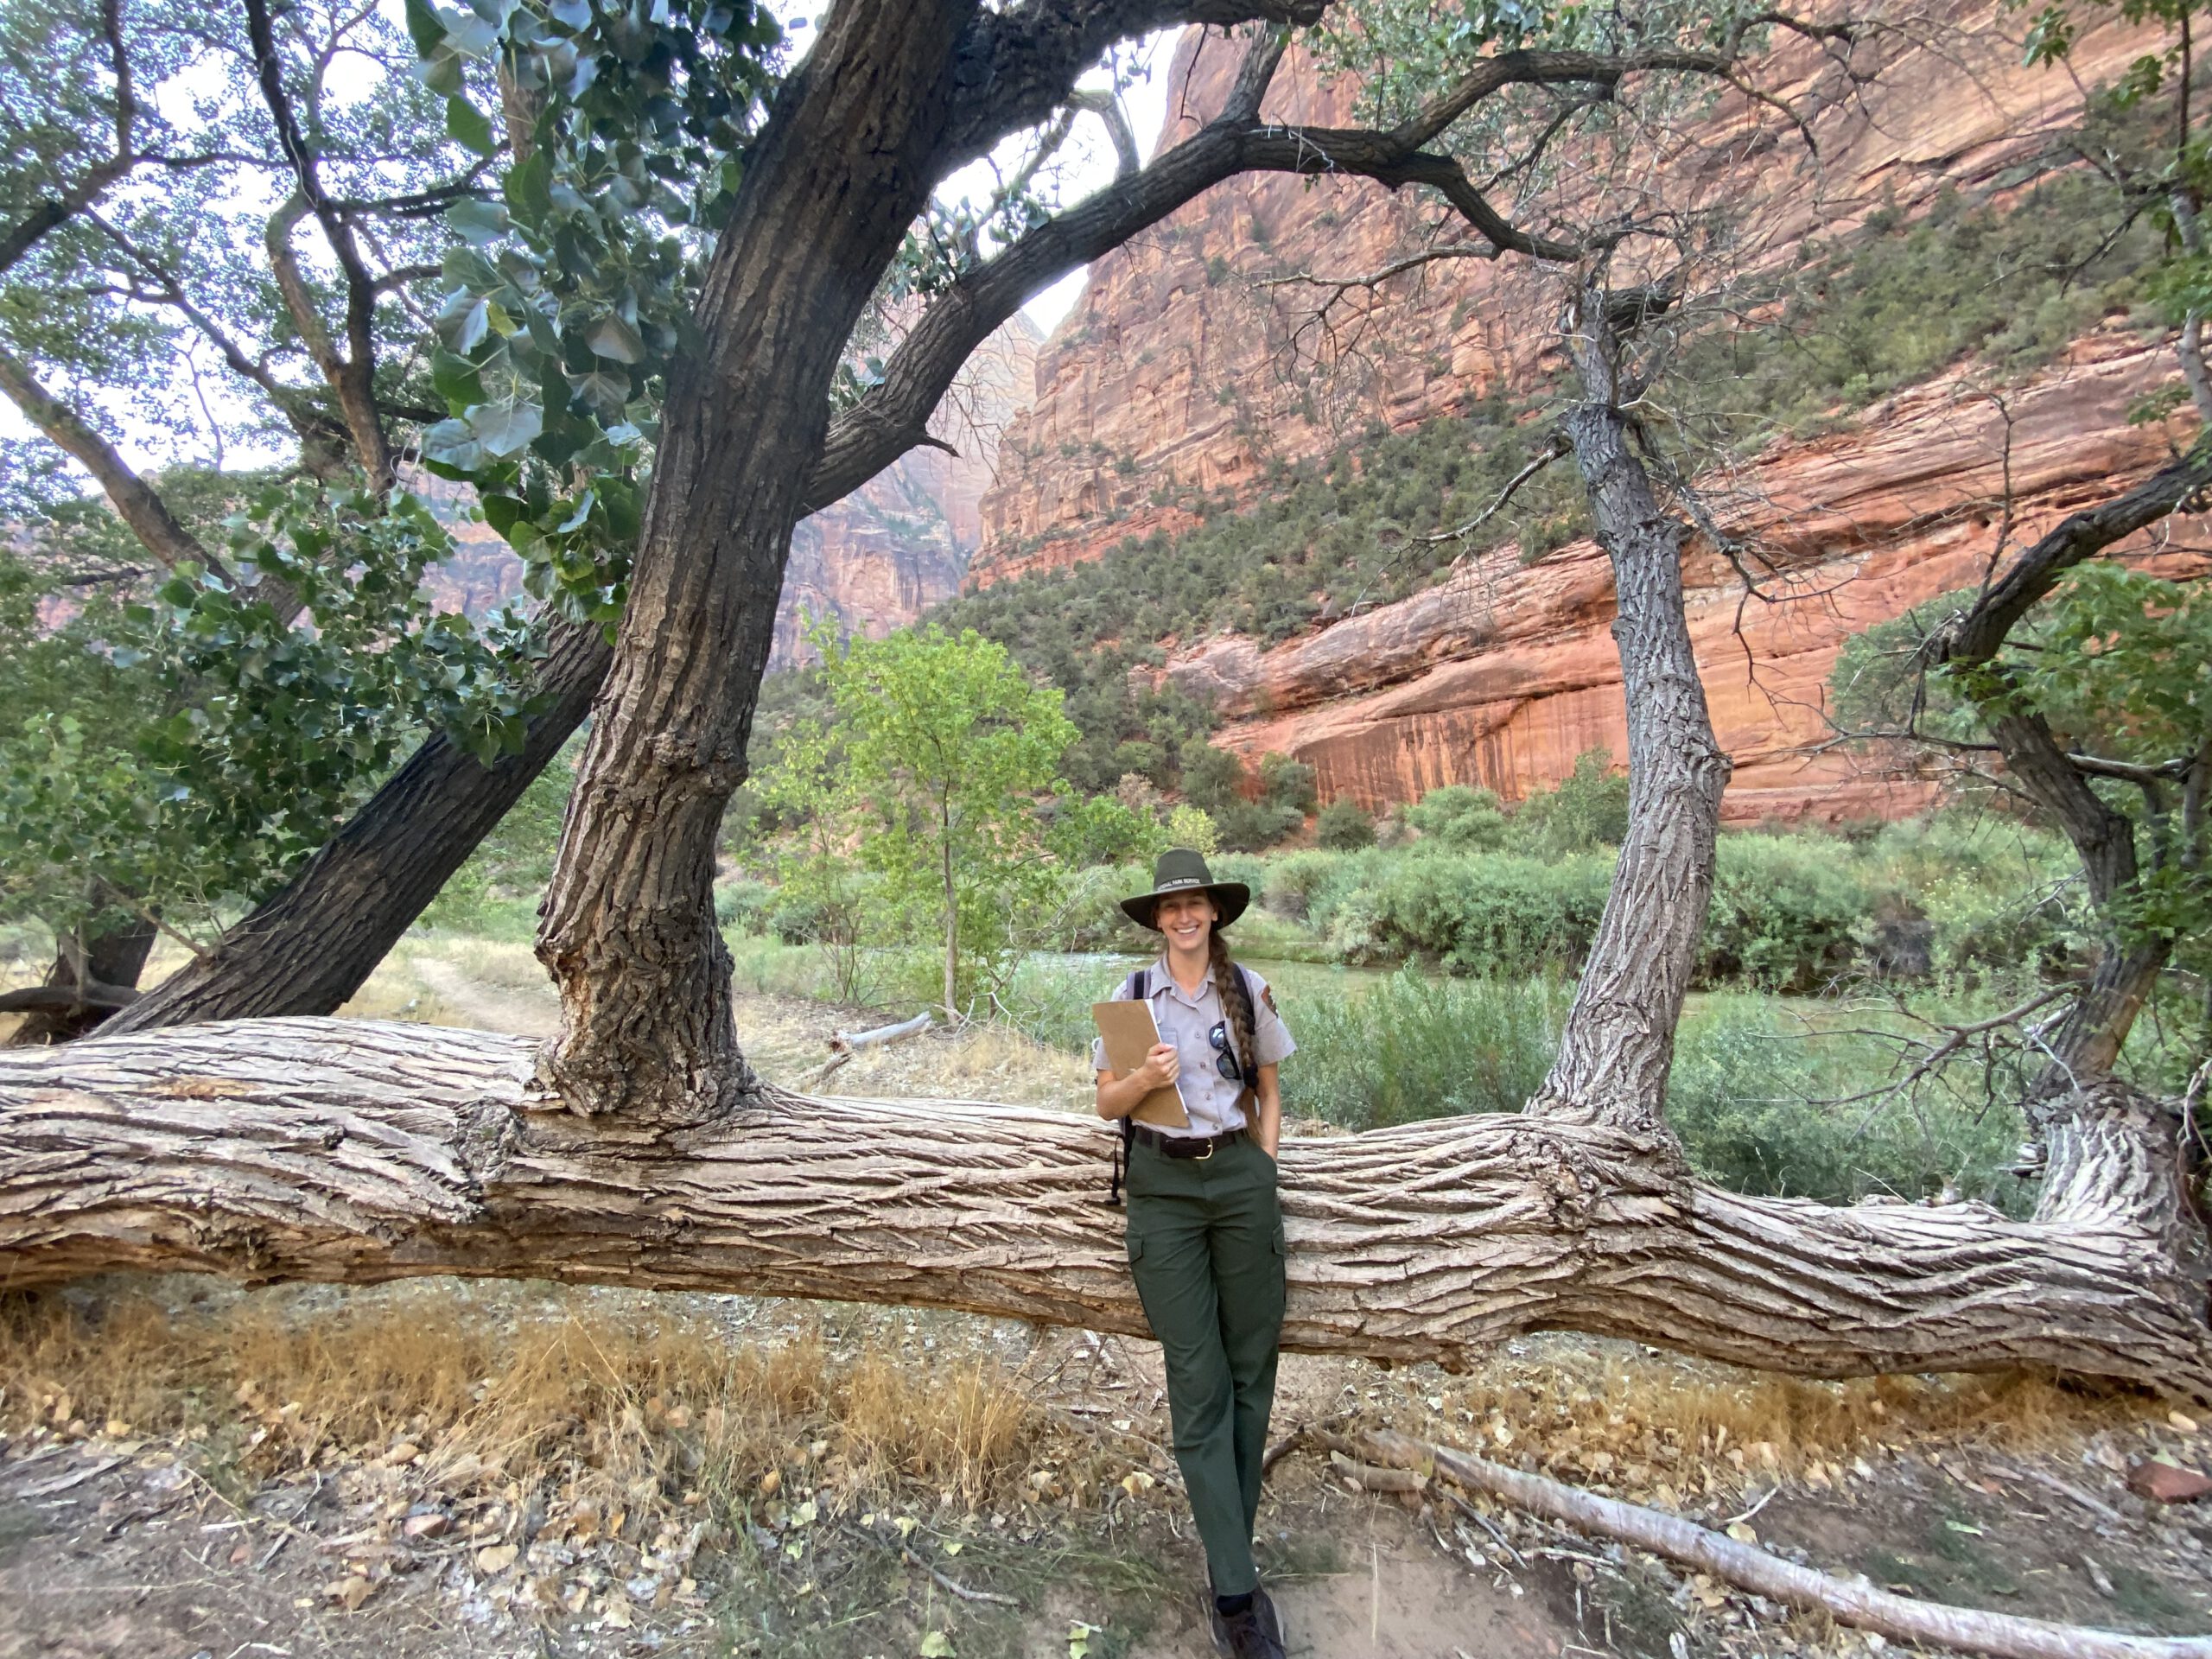 Park ranger giving a history walk in Zion National Park